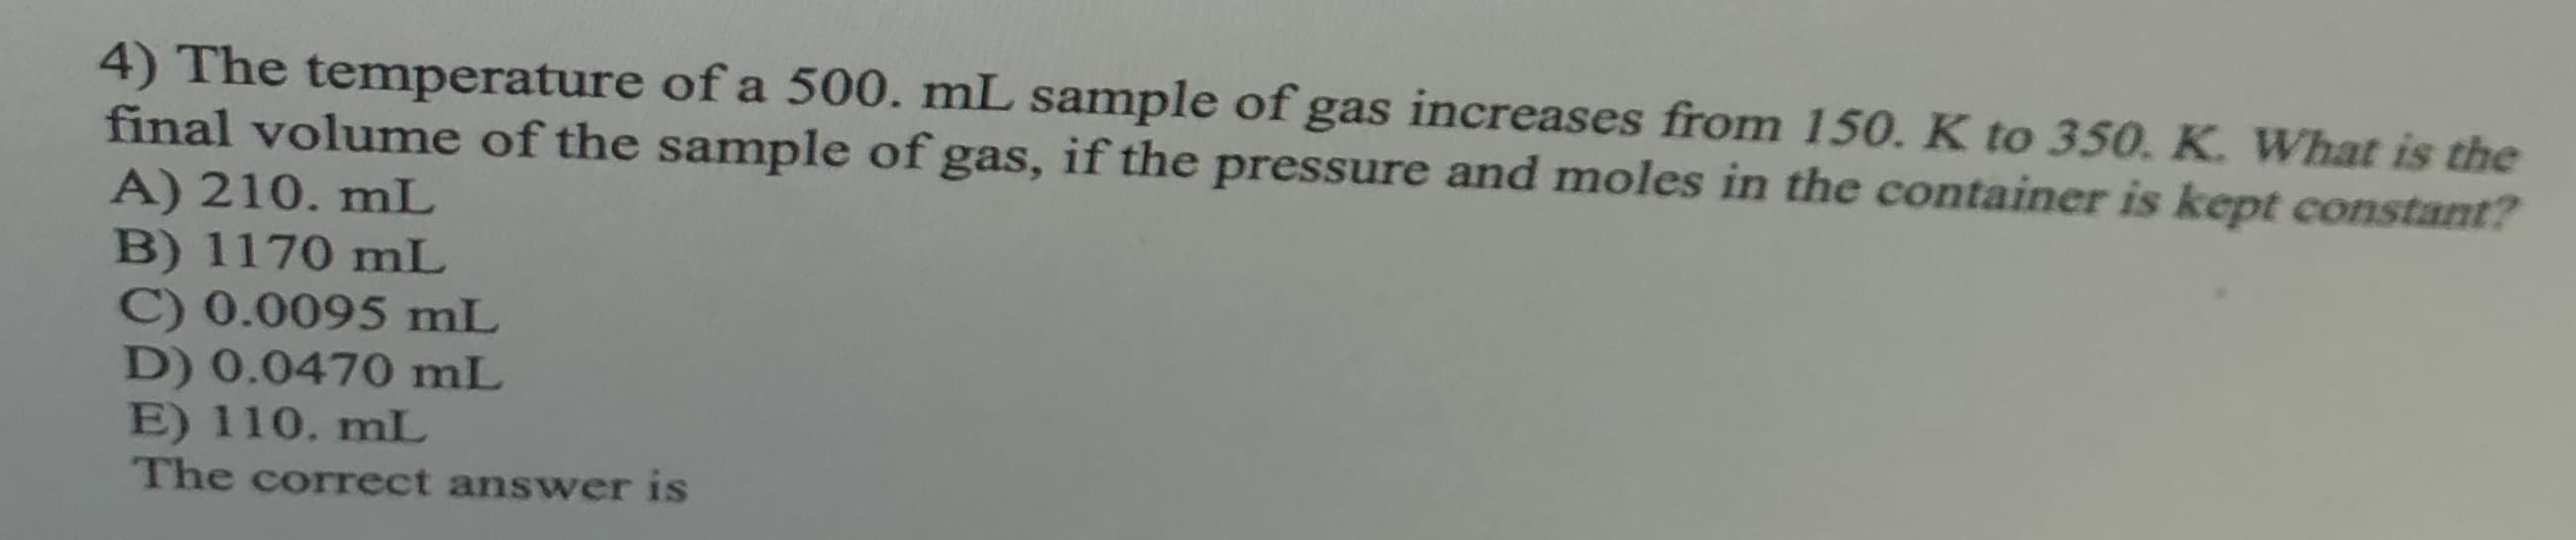 4) The temperature of a 500. mL sample of gas increases from 150. K to 350. K. What is the
final volume of the sample of gas, if the pressure and moles in the container is kept constant?
A) 210. mL
B) 1170 mL
C) 0.0095 mL
D) 0.0470 mL
E) 110. mL
